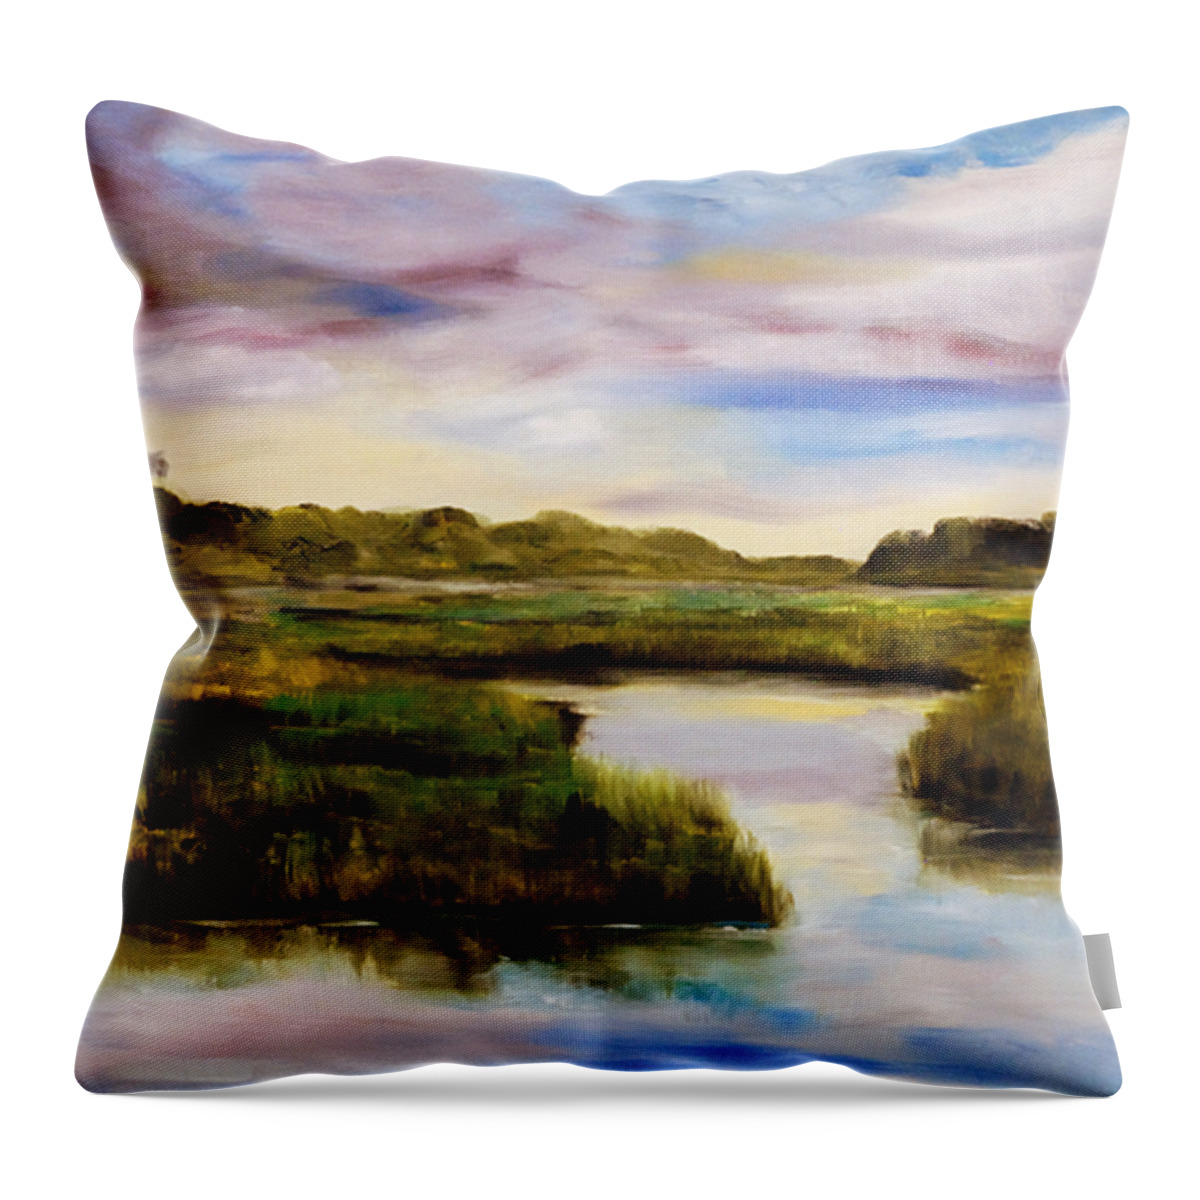 South Carolina Low Country Marsh Throw Pillow featuring the painting Low Country by Phil Burton